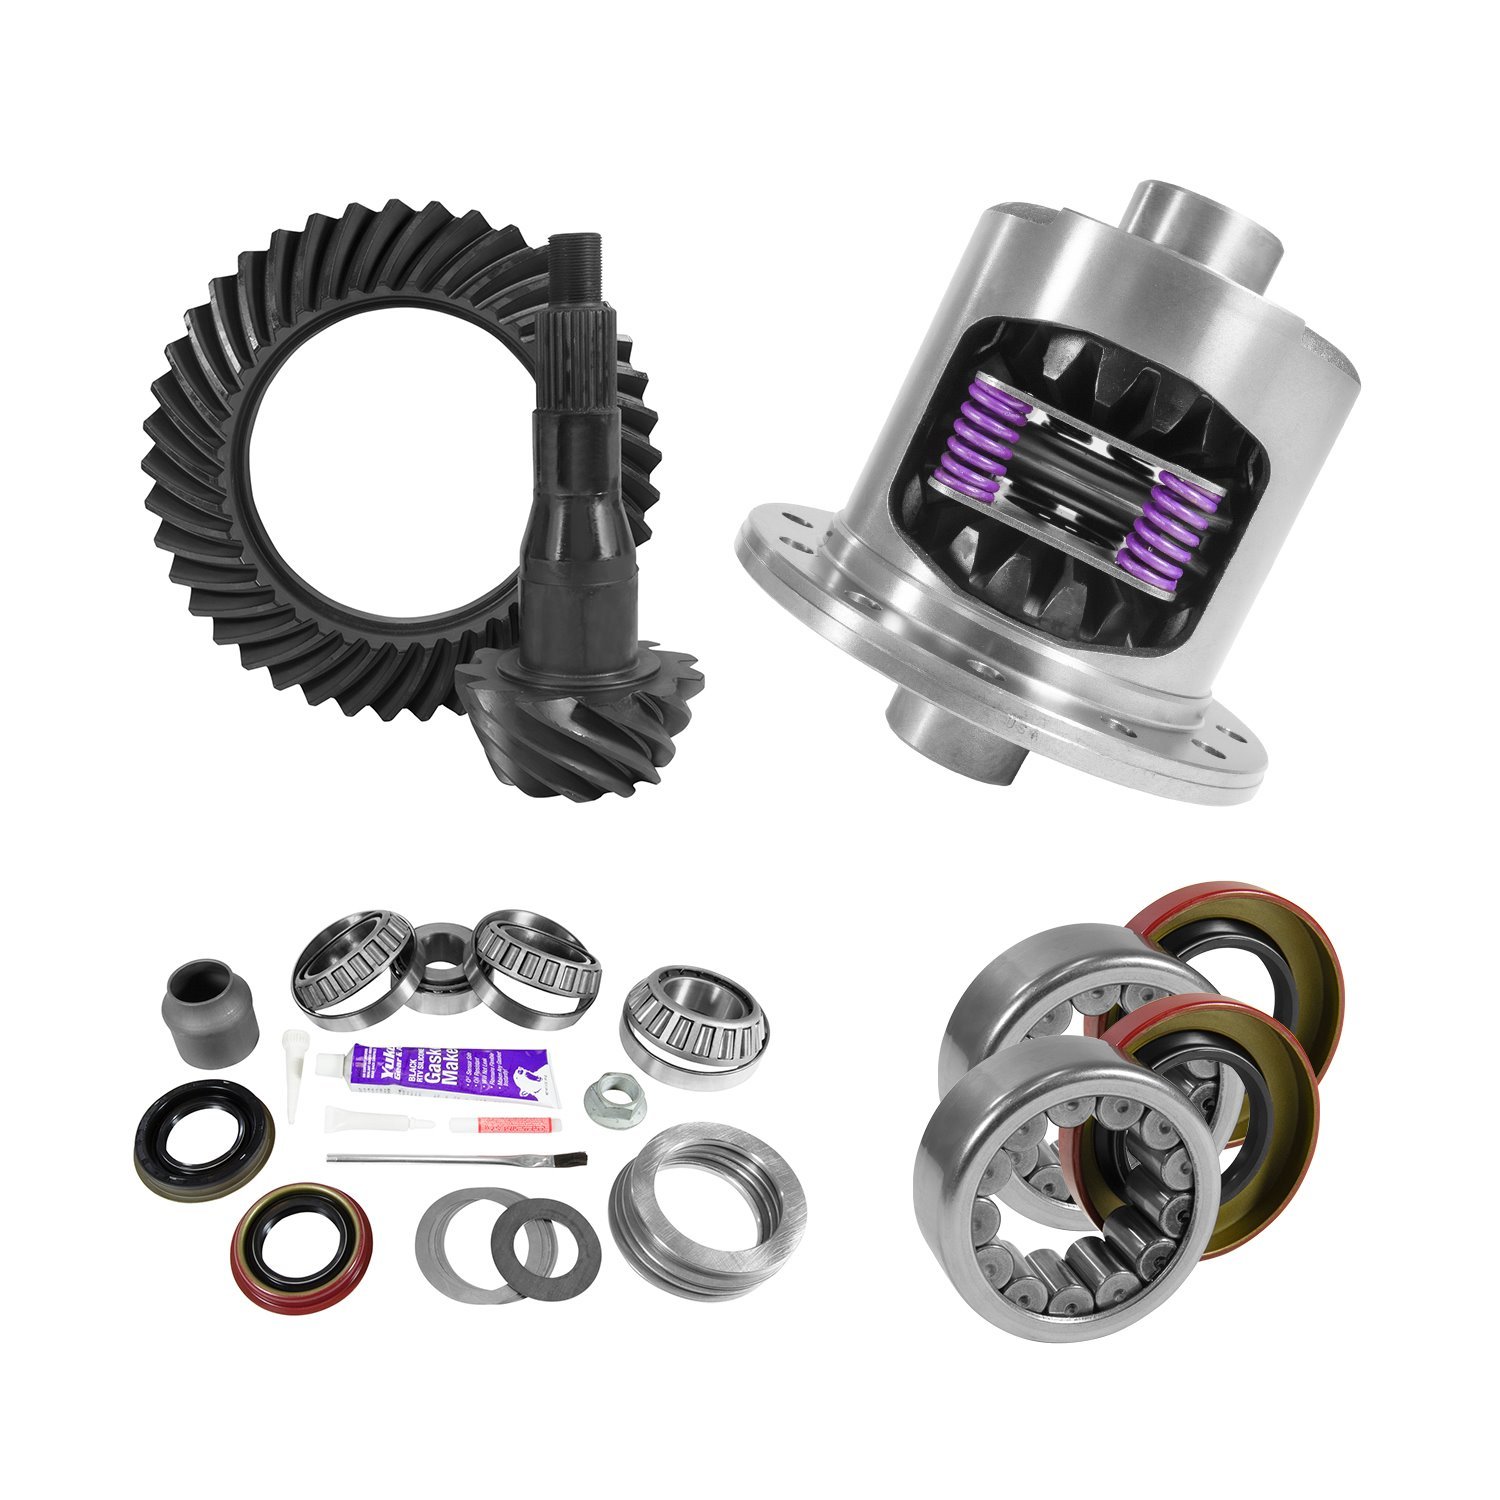 USA Standard 10810 9.75 in. Ford 4.11 Rear Ring & Pinion Install Kit, 34Spl Posi, 2.99 in. Axle Bearing